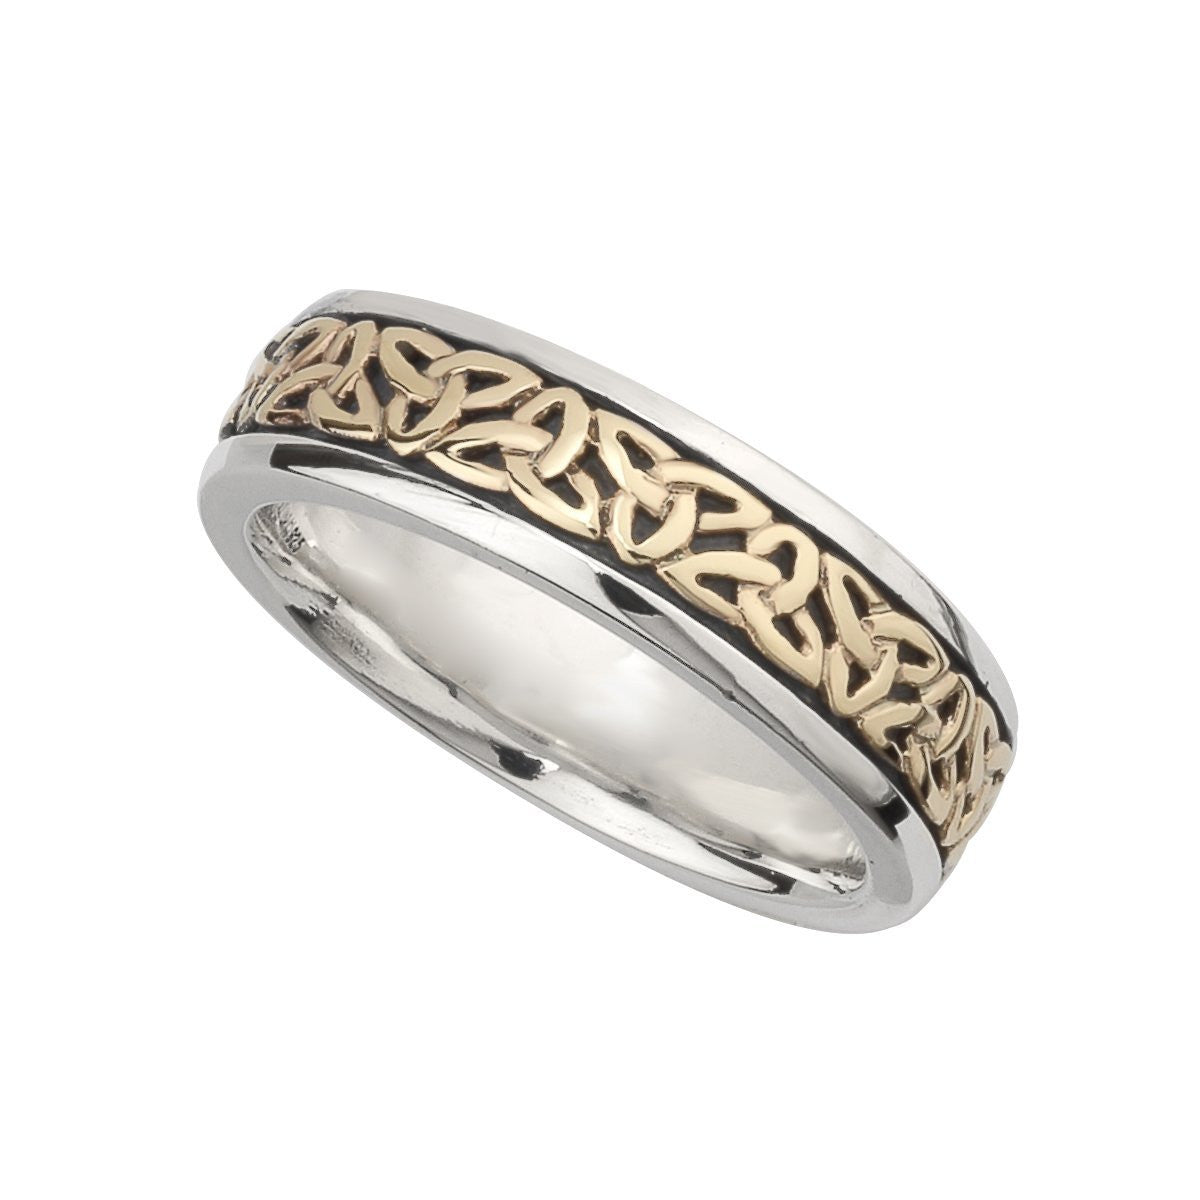 S21009 Silver and 10K Gold Ladies Trinity Knot Band